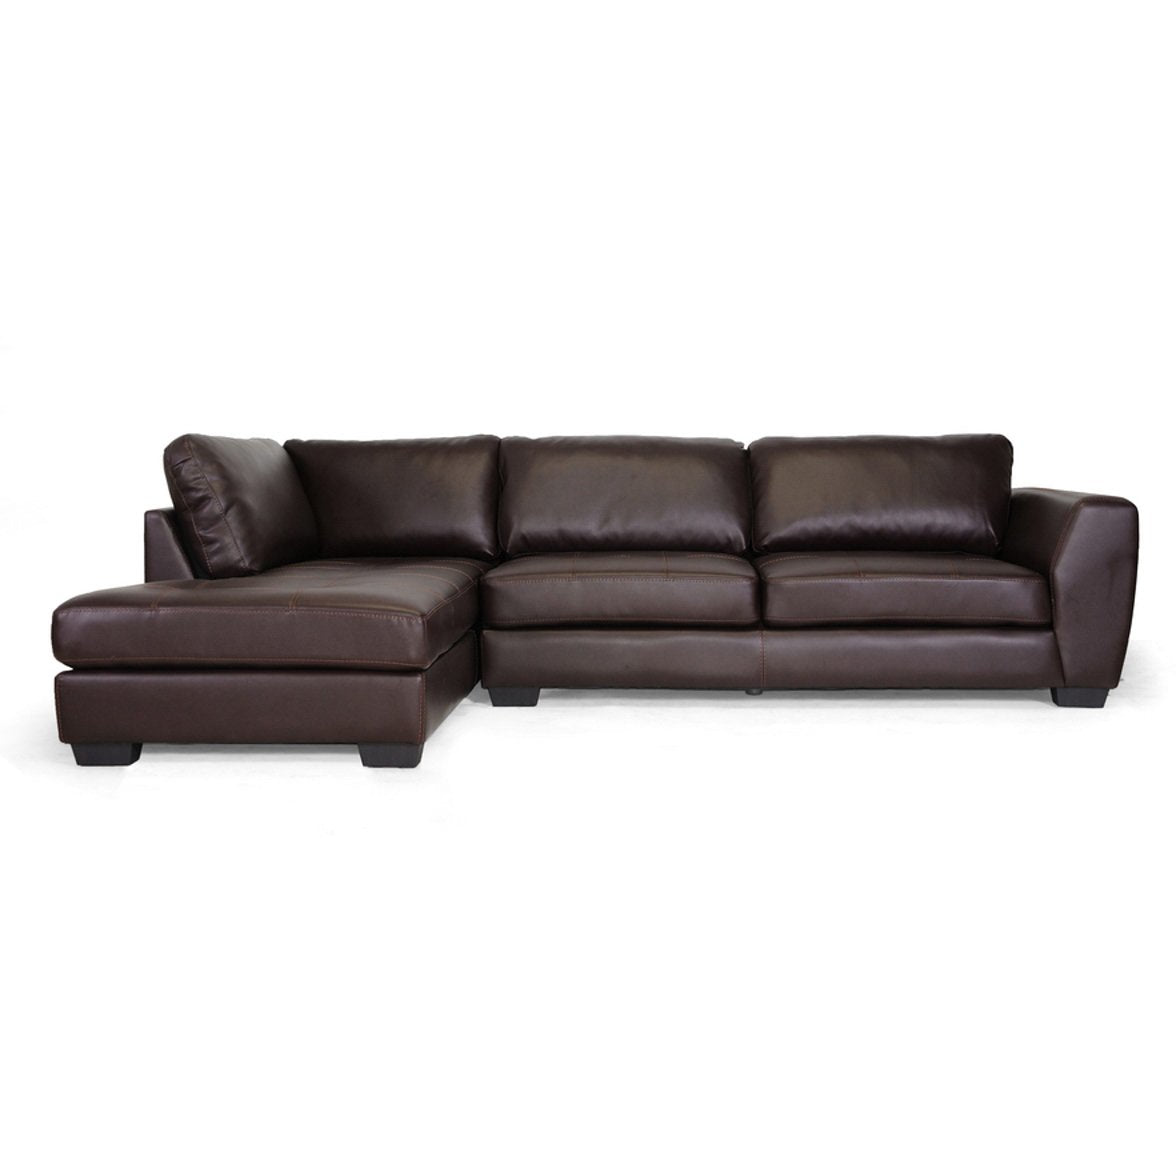 Baxton Studio Orland Brown Leather Modern Sectional Sofa Set with Left Facing Chaise Baxton Studio-sectionals-Minimal And Modern - 2